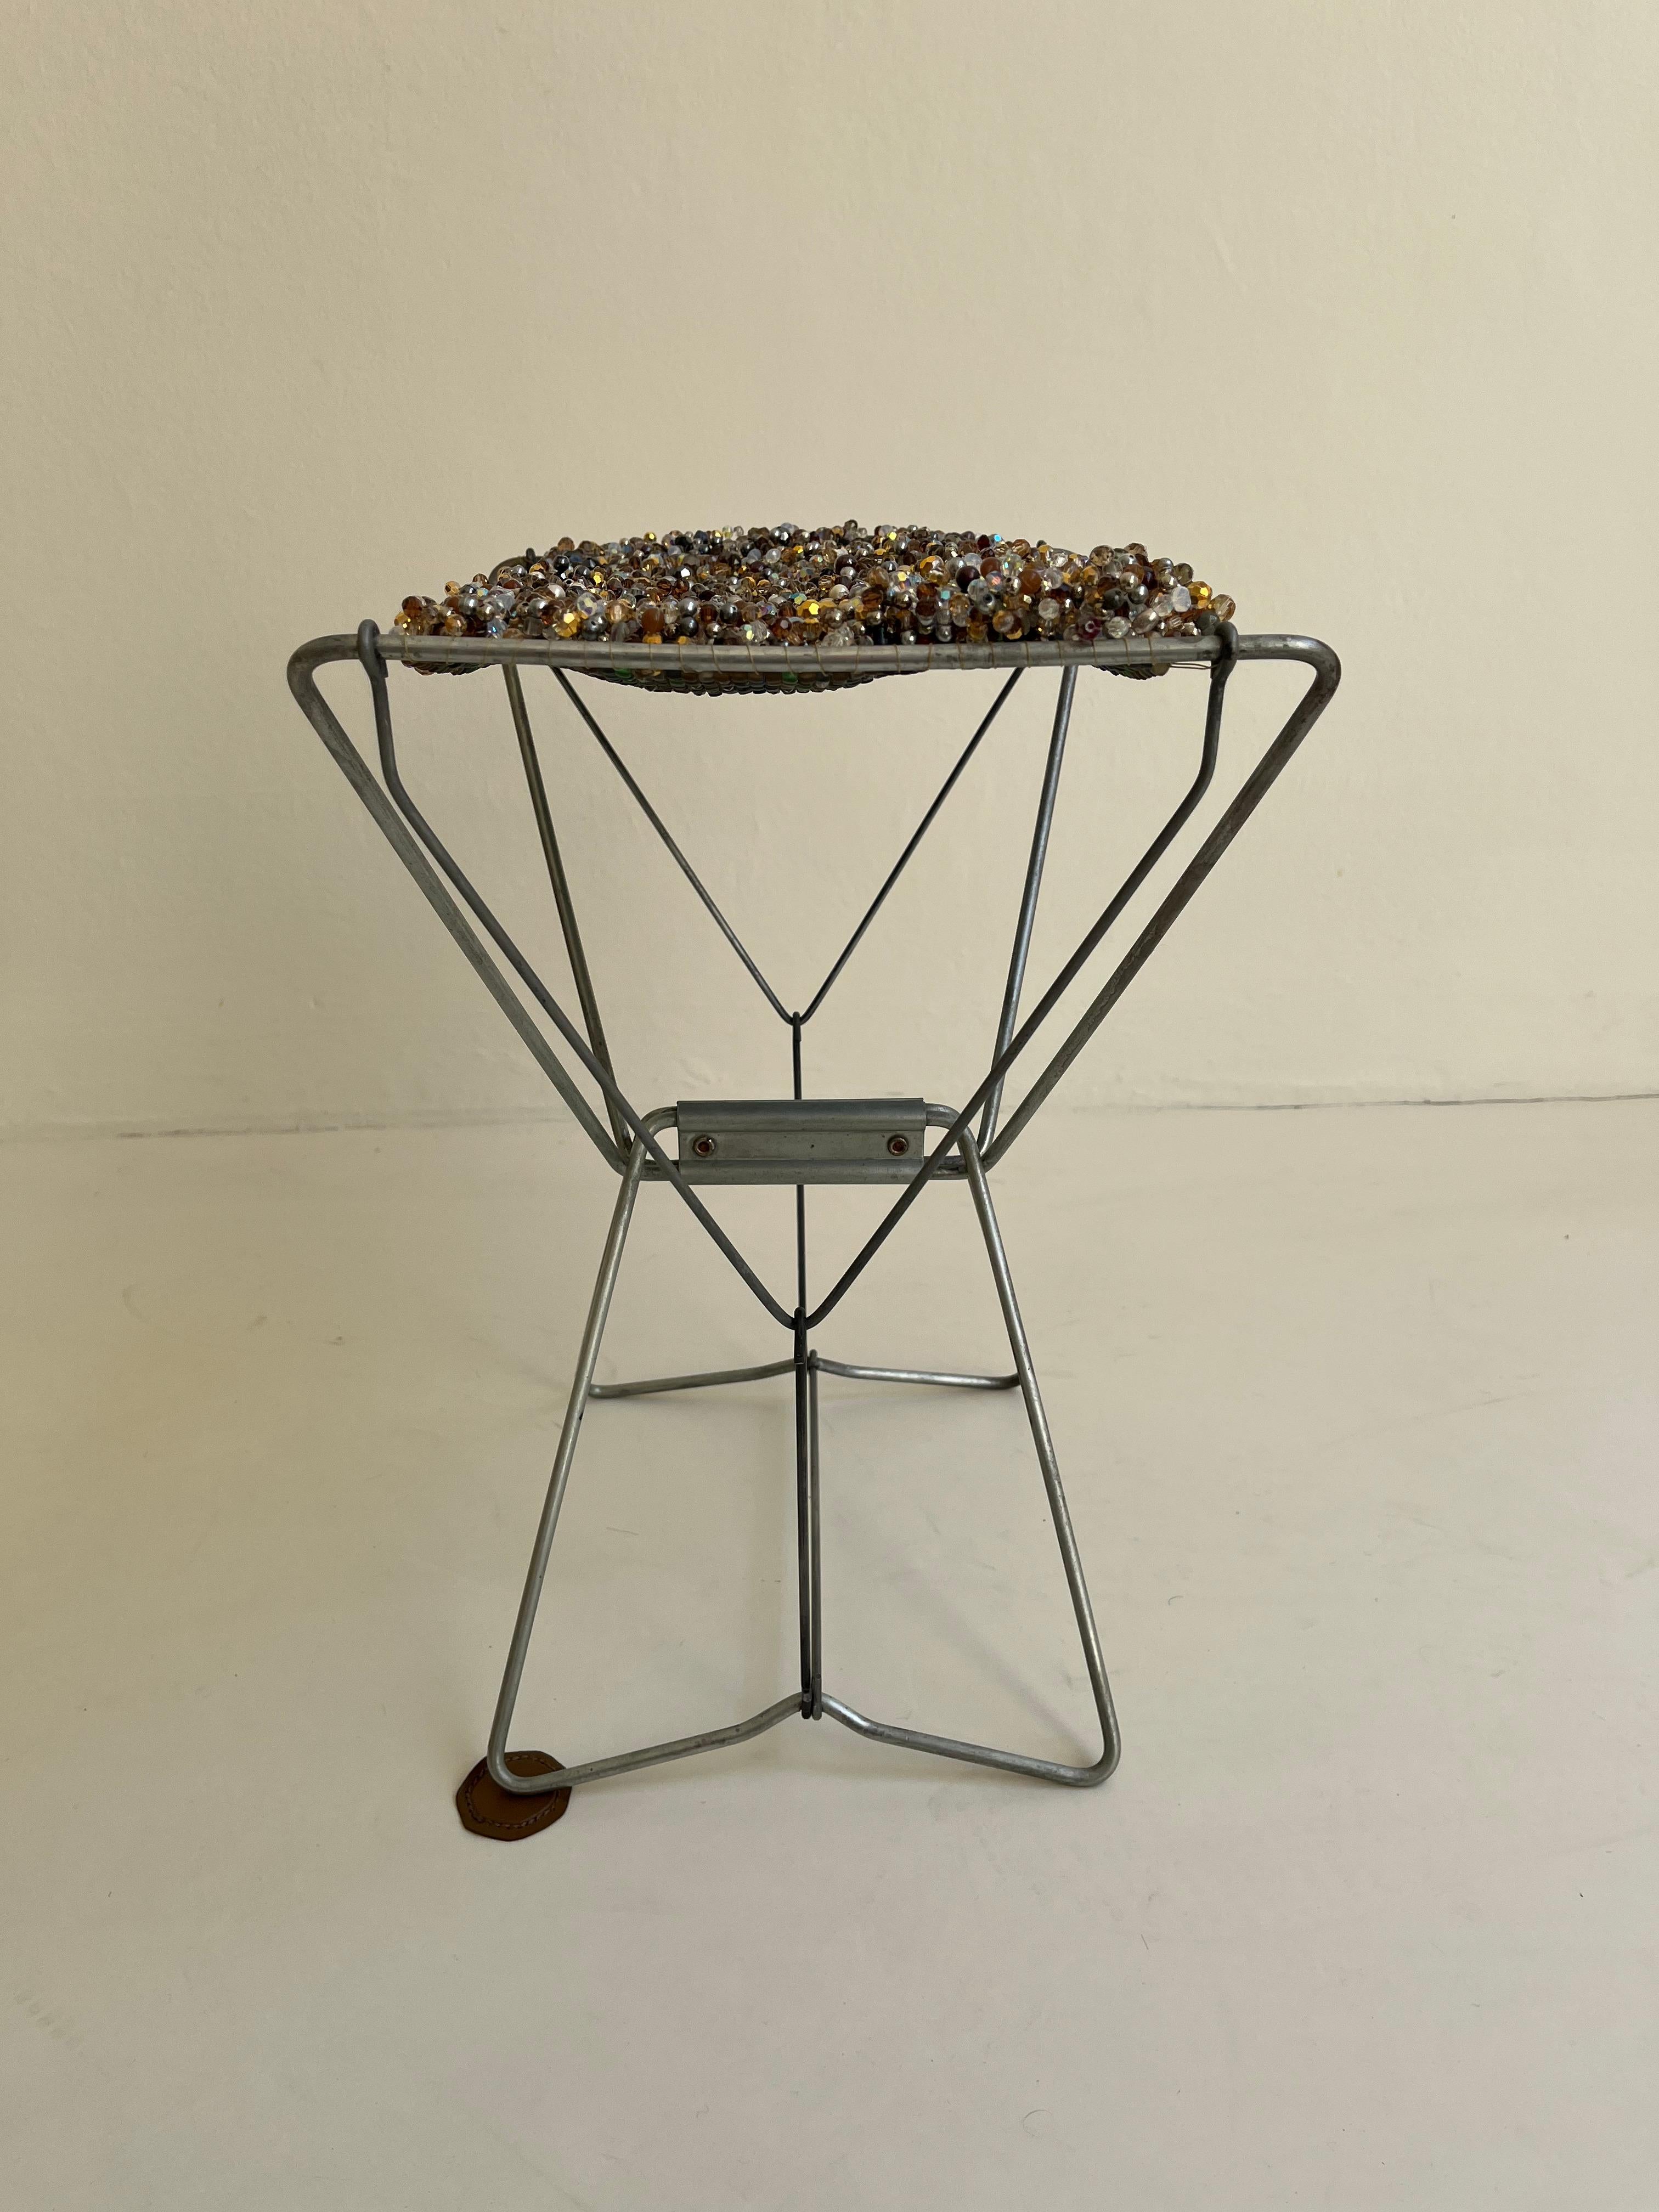 Vintage Fishermen stool in galvanized metal whose seat has been replaced by a weaving of glass beads. The stool becomes an interior Jewel.
(IT IS NOT POSSIBLE TO SIT ON THIS STOOL)

With this set of old-fashioned stools, JN. Mellor Club continues